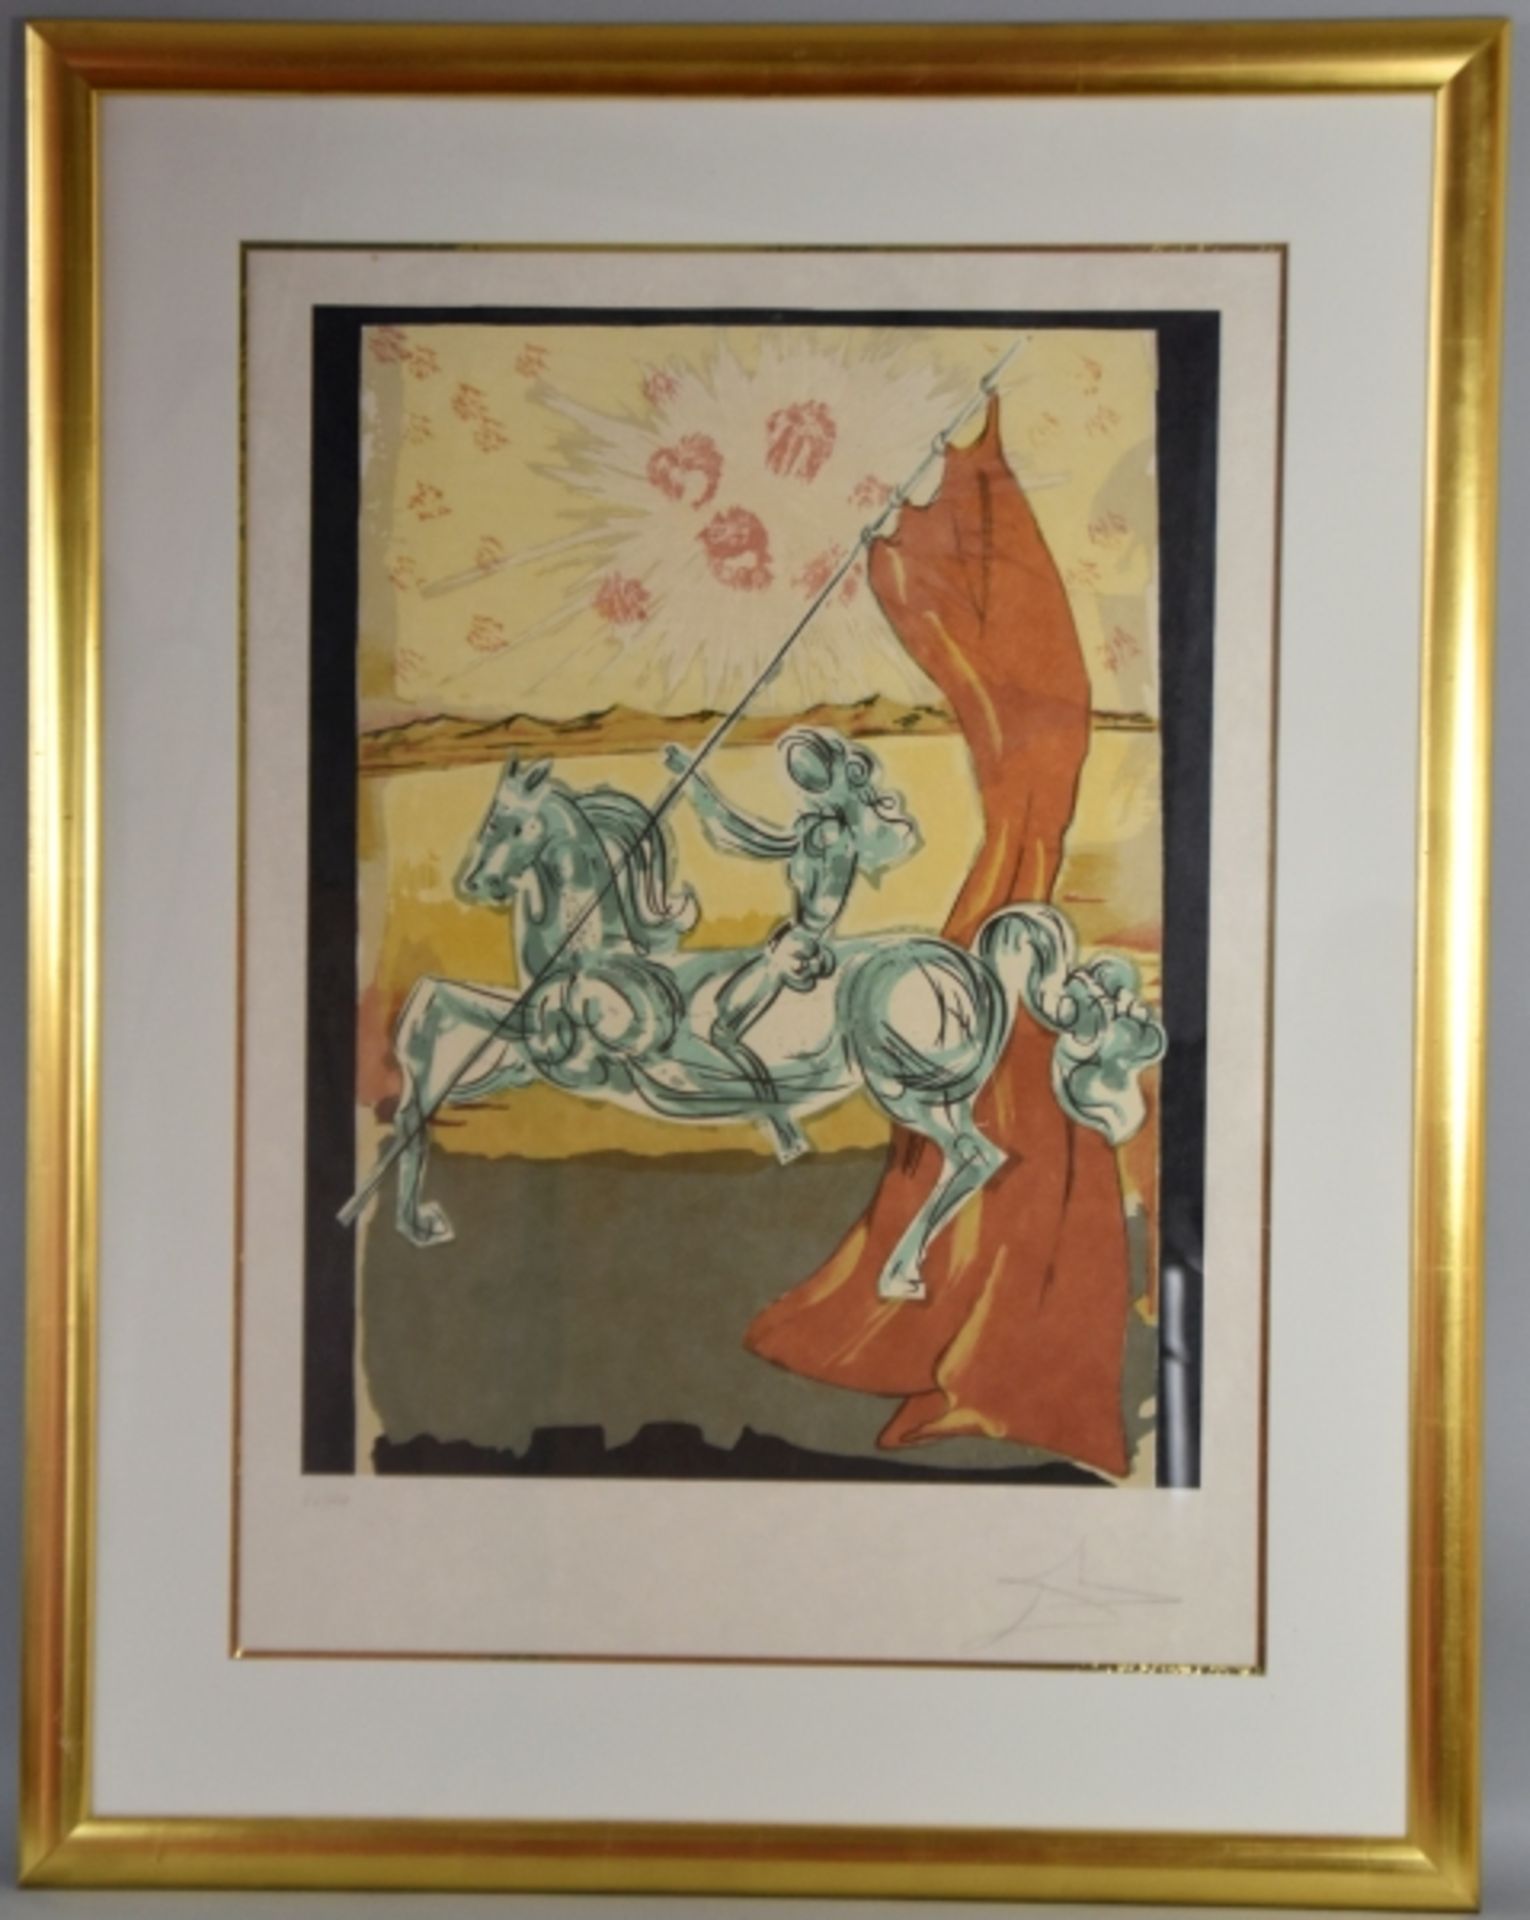 DALI Salvadore (1904-1989 Figueres) "Reiterin mit Fahne", wohl Jeanne D'Arc, Farblithographie,